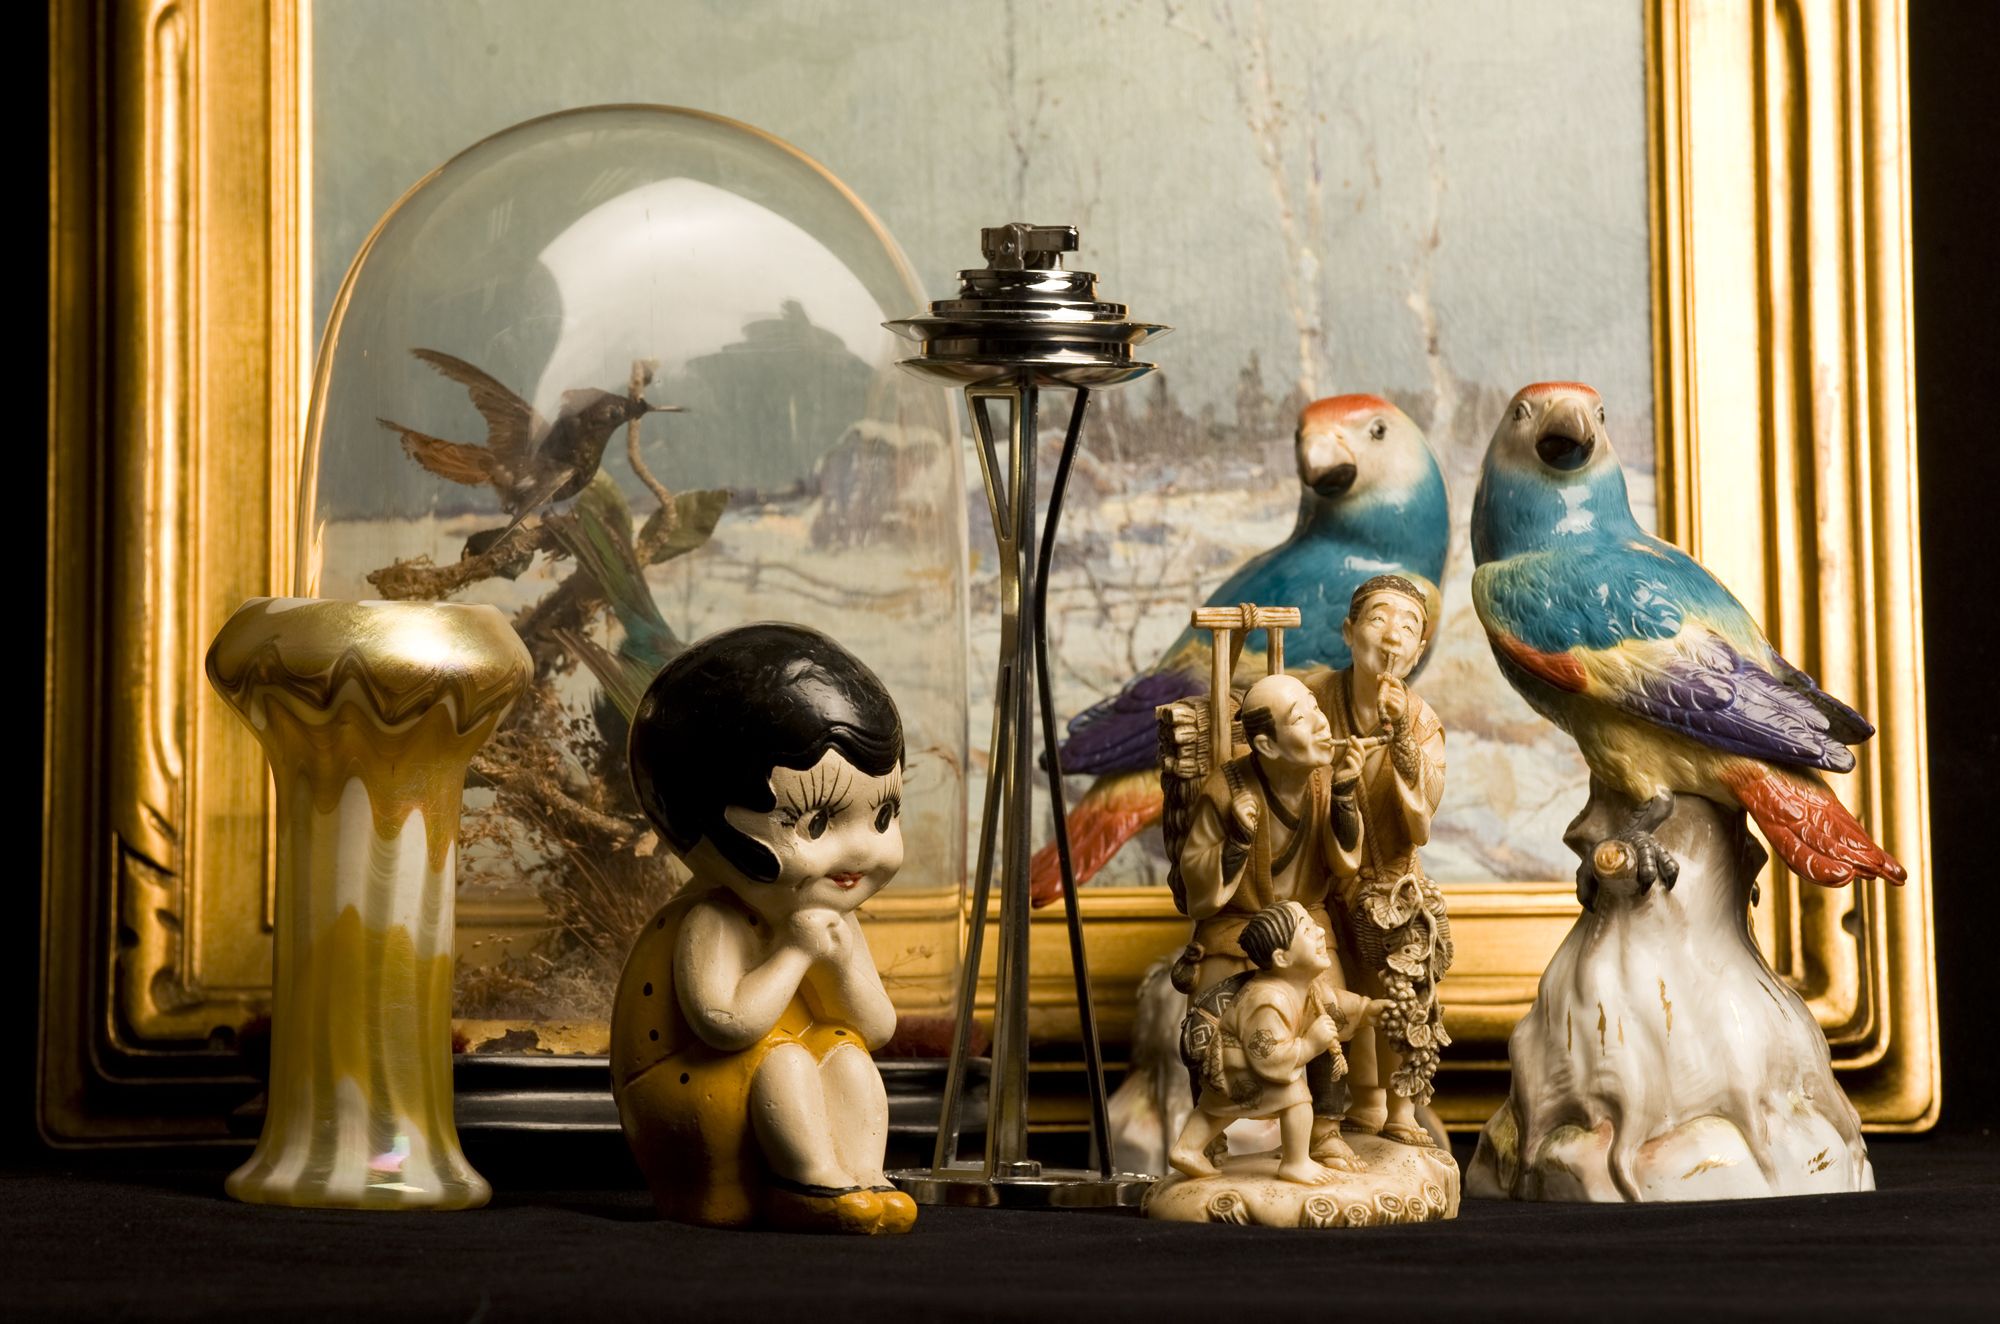 The Clark County Antique &amp; Collectible Show will feature unusual items from hundreds of exhibitors from the Pacific Northwest and across the U.S.